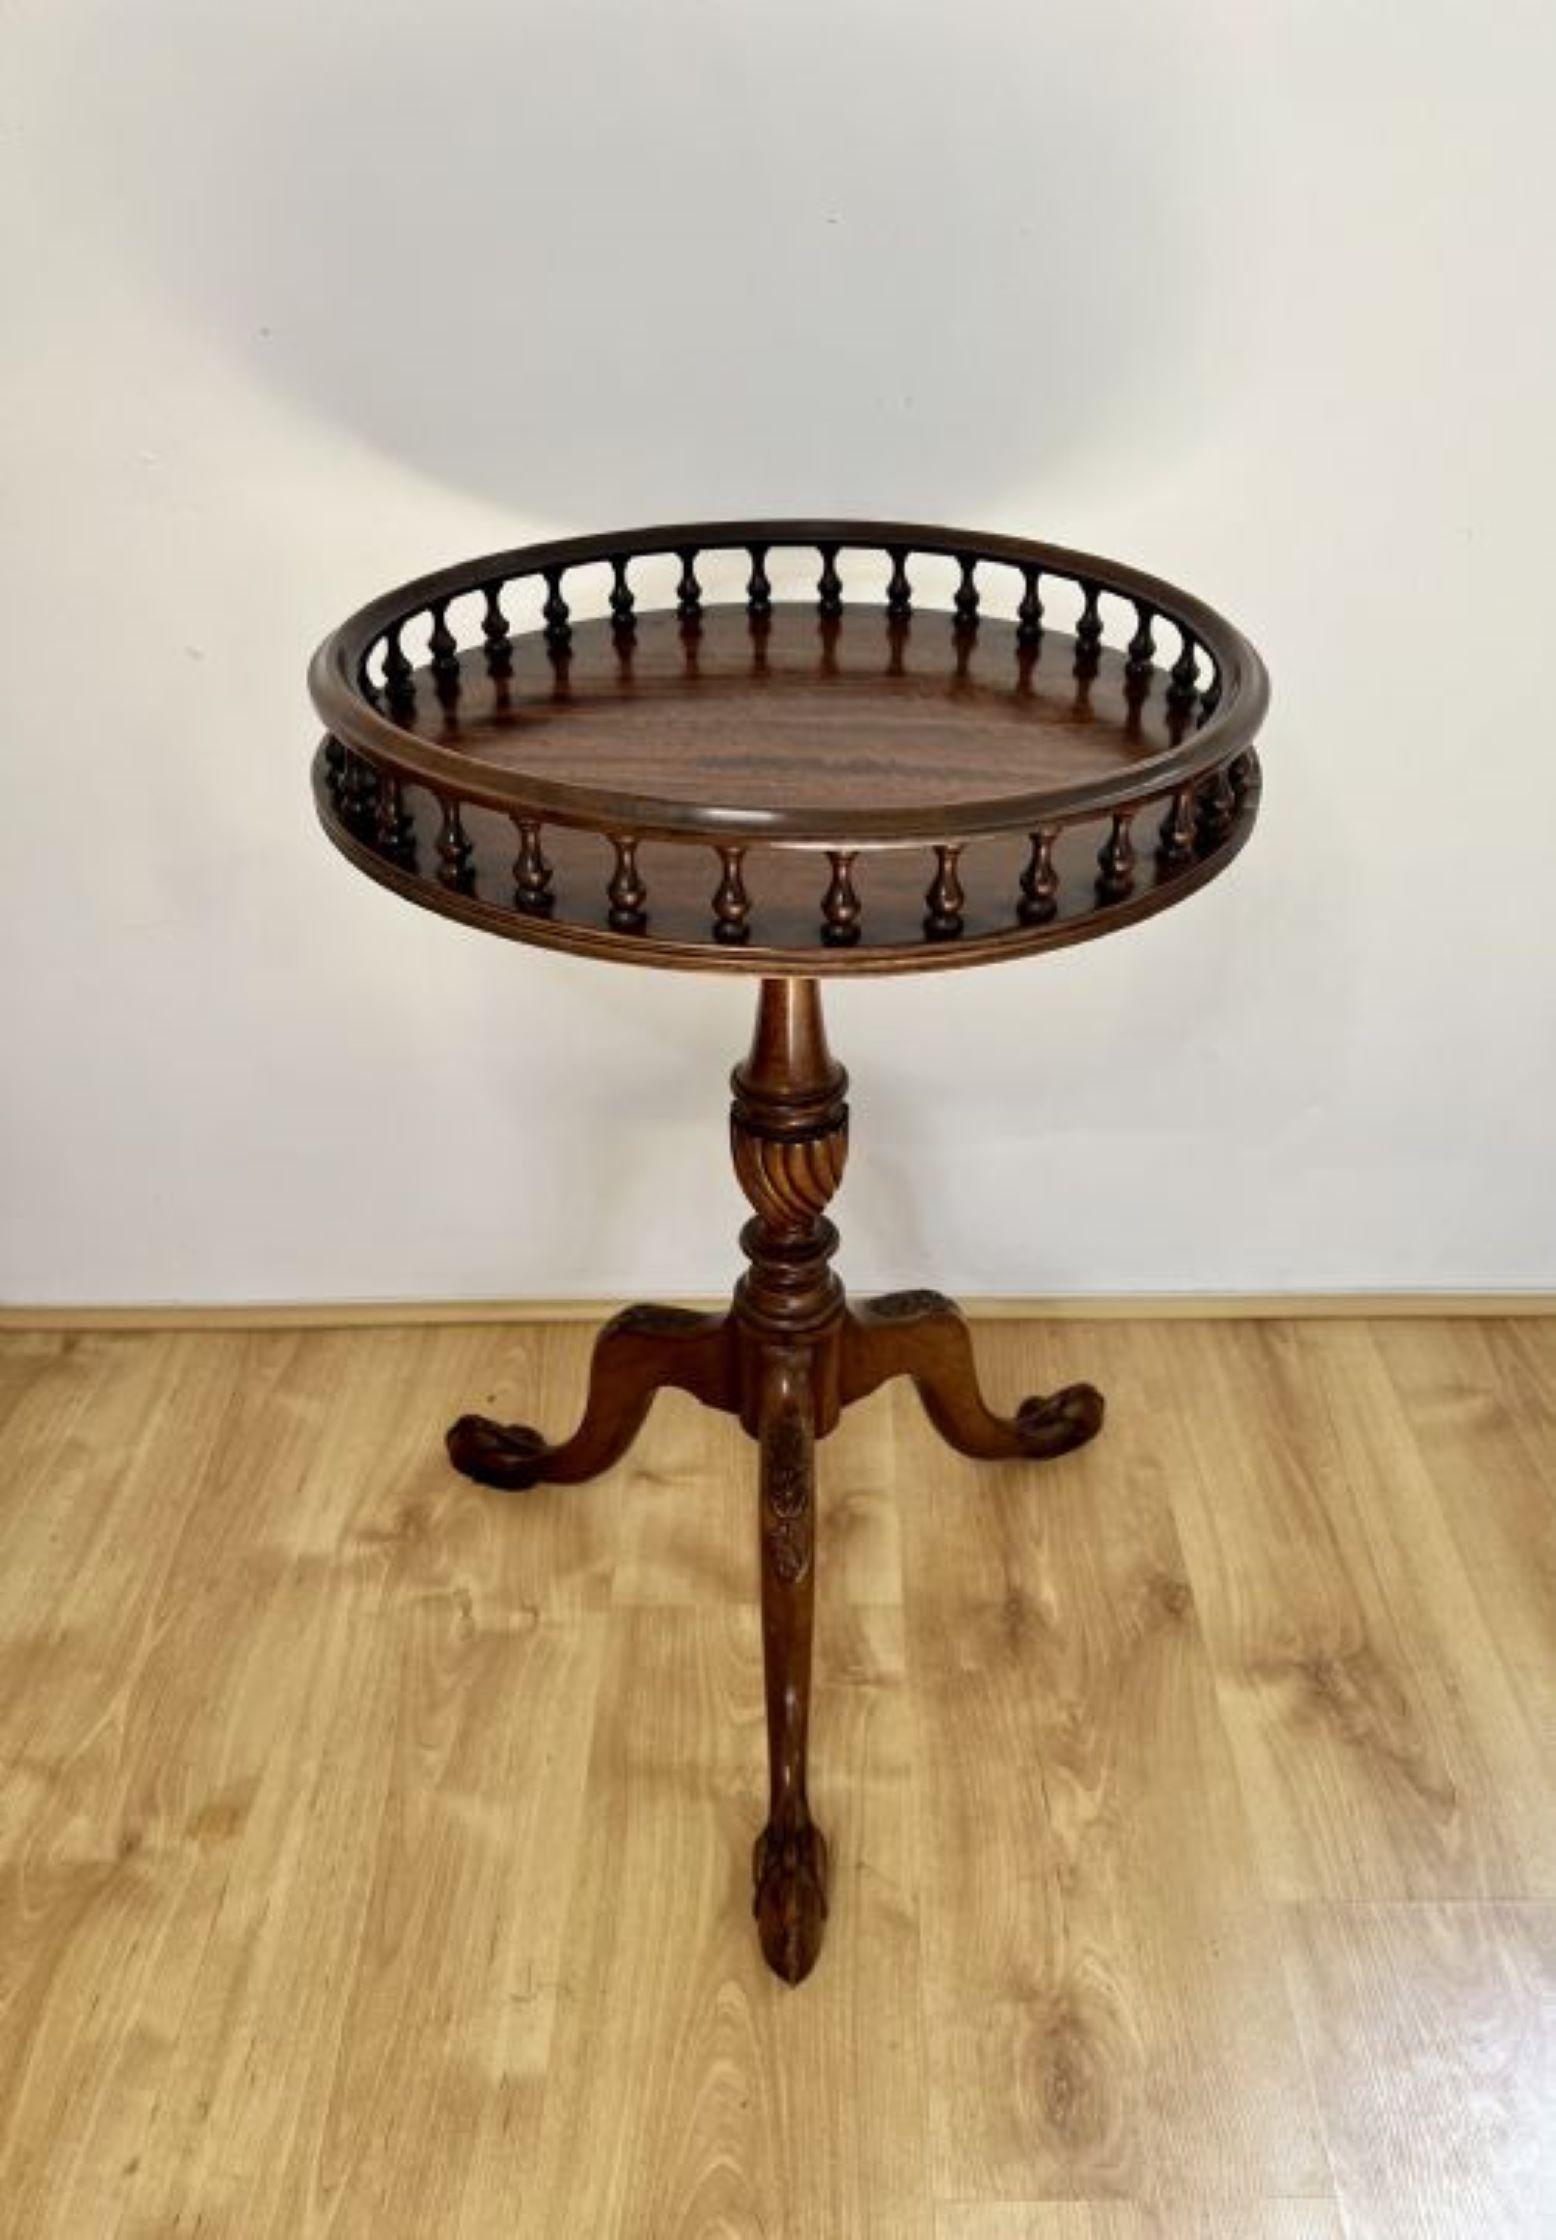 Antique quality mahogany circular lamp table having a quality mahogany circular top with a spindle gallery supported by a turned twist tapering column, standing on shaped carved mahogany cabriole legs with claw feet.